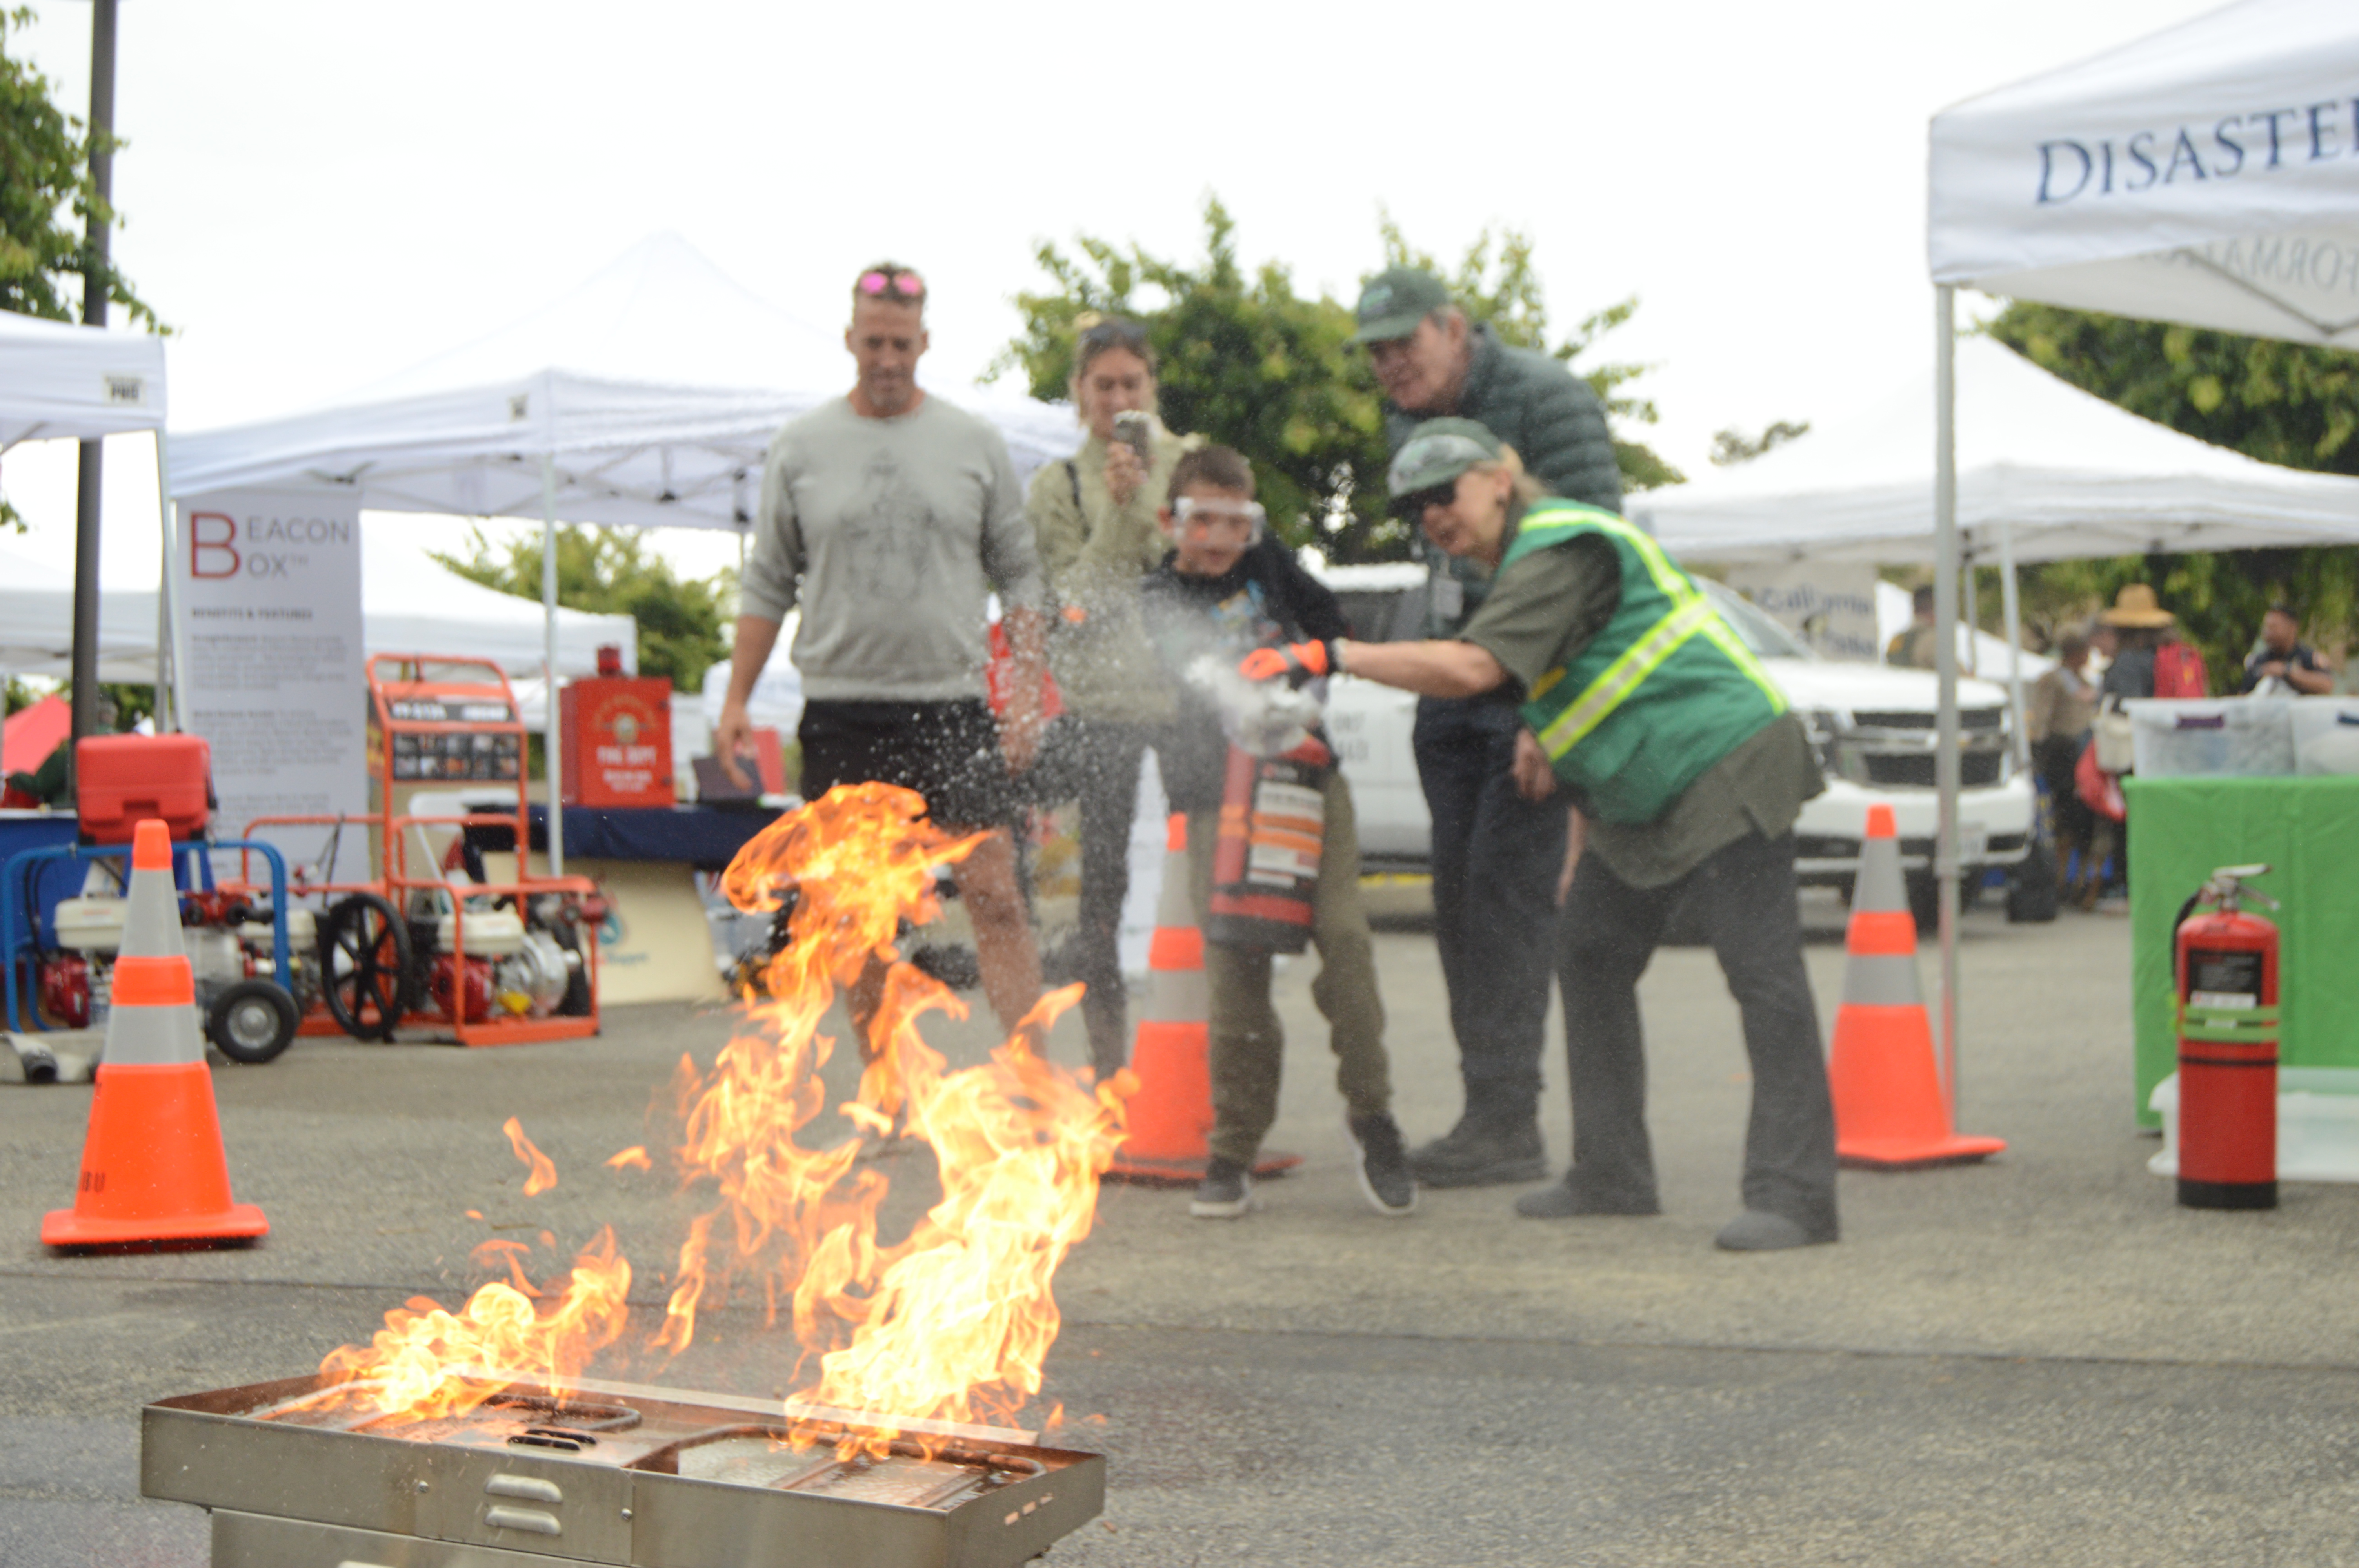 Boonson Schmidt 14 extinguishes a fire with help from the CERT team at the Safety Expo on June 10 2